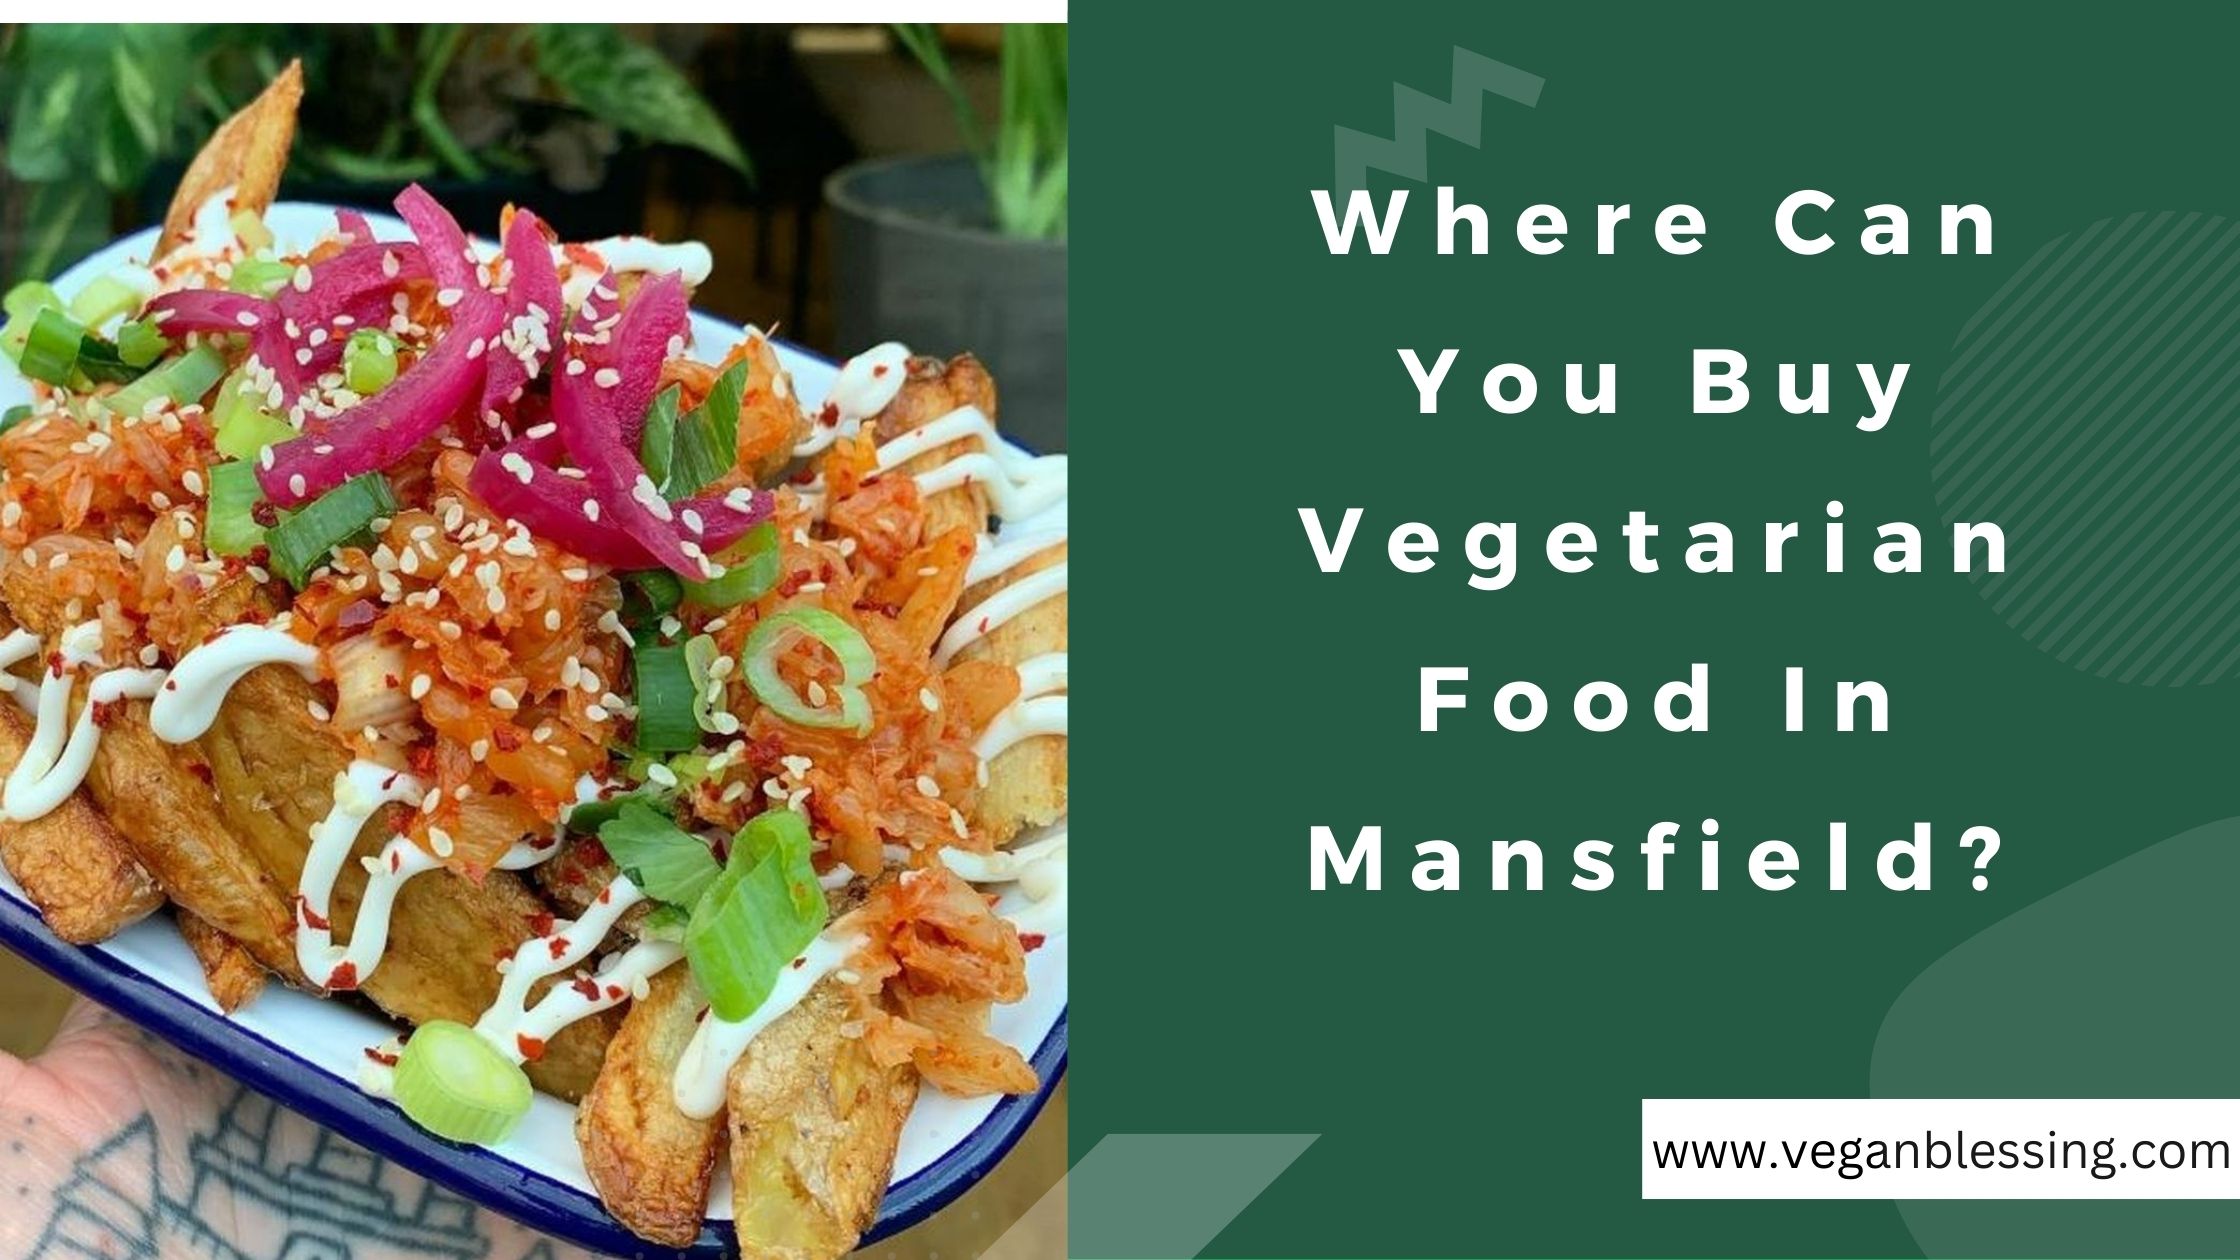 Where Can You Buy Vegetarian Food In Mansfield? Where Can You Buy Vegetarian Food In Mansfield